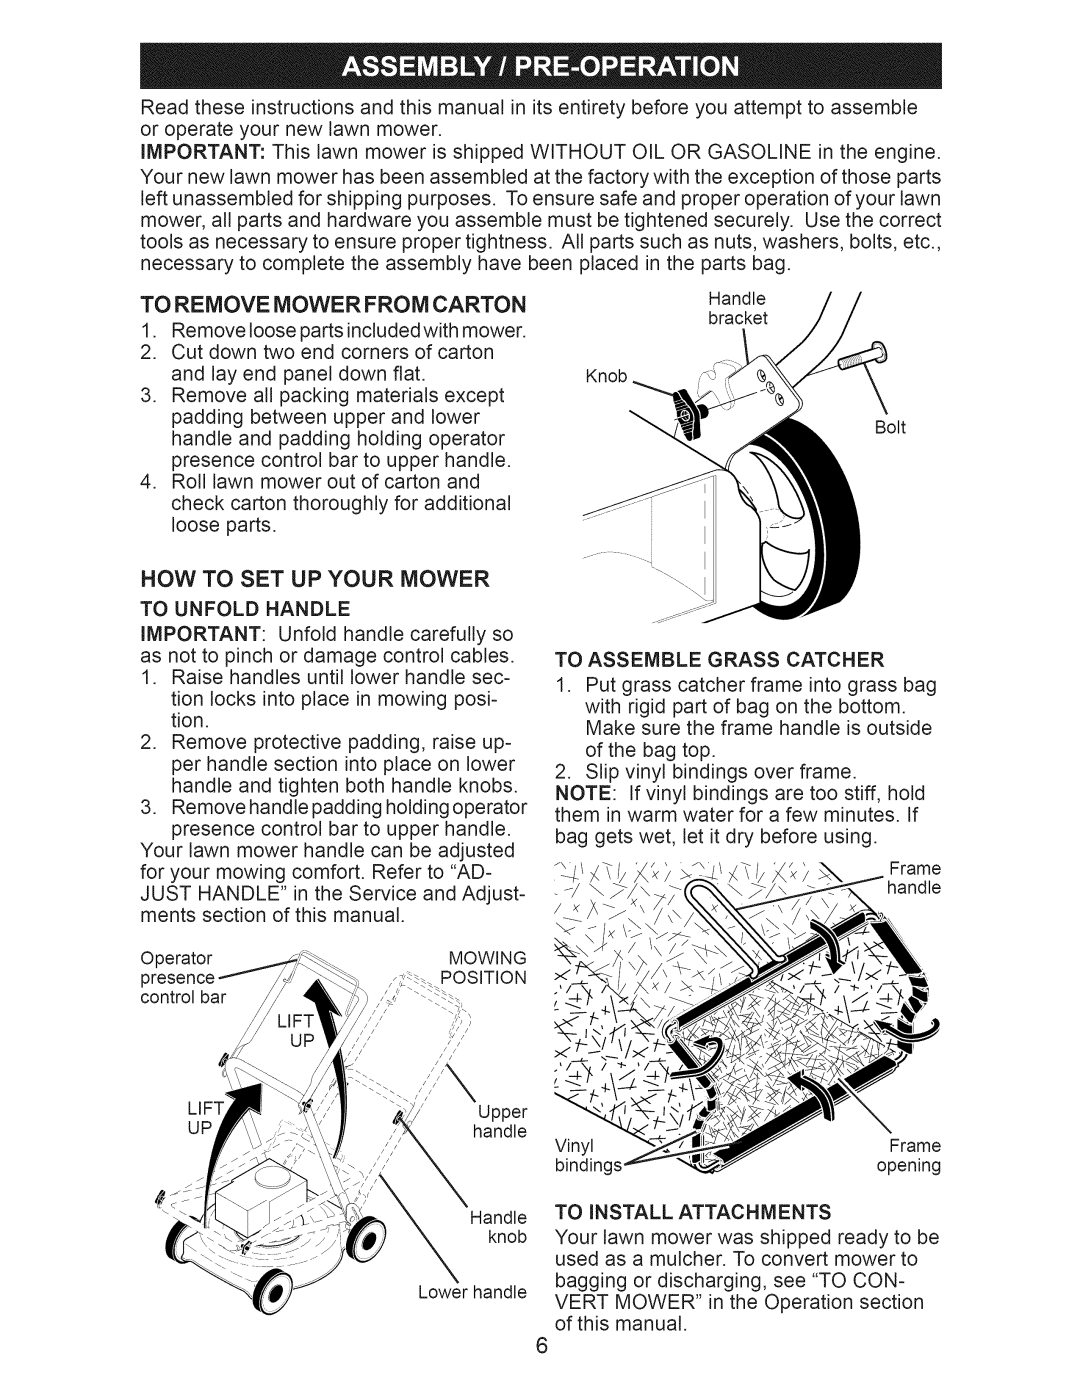 Craftsman 917.374540 owner manual To Remove Mower From Carton, Now To Set Up Your Mower 